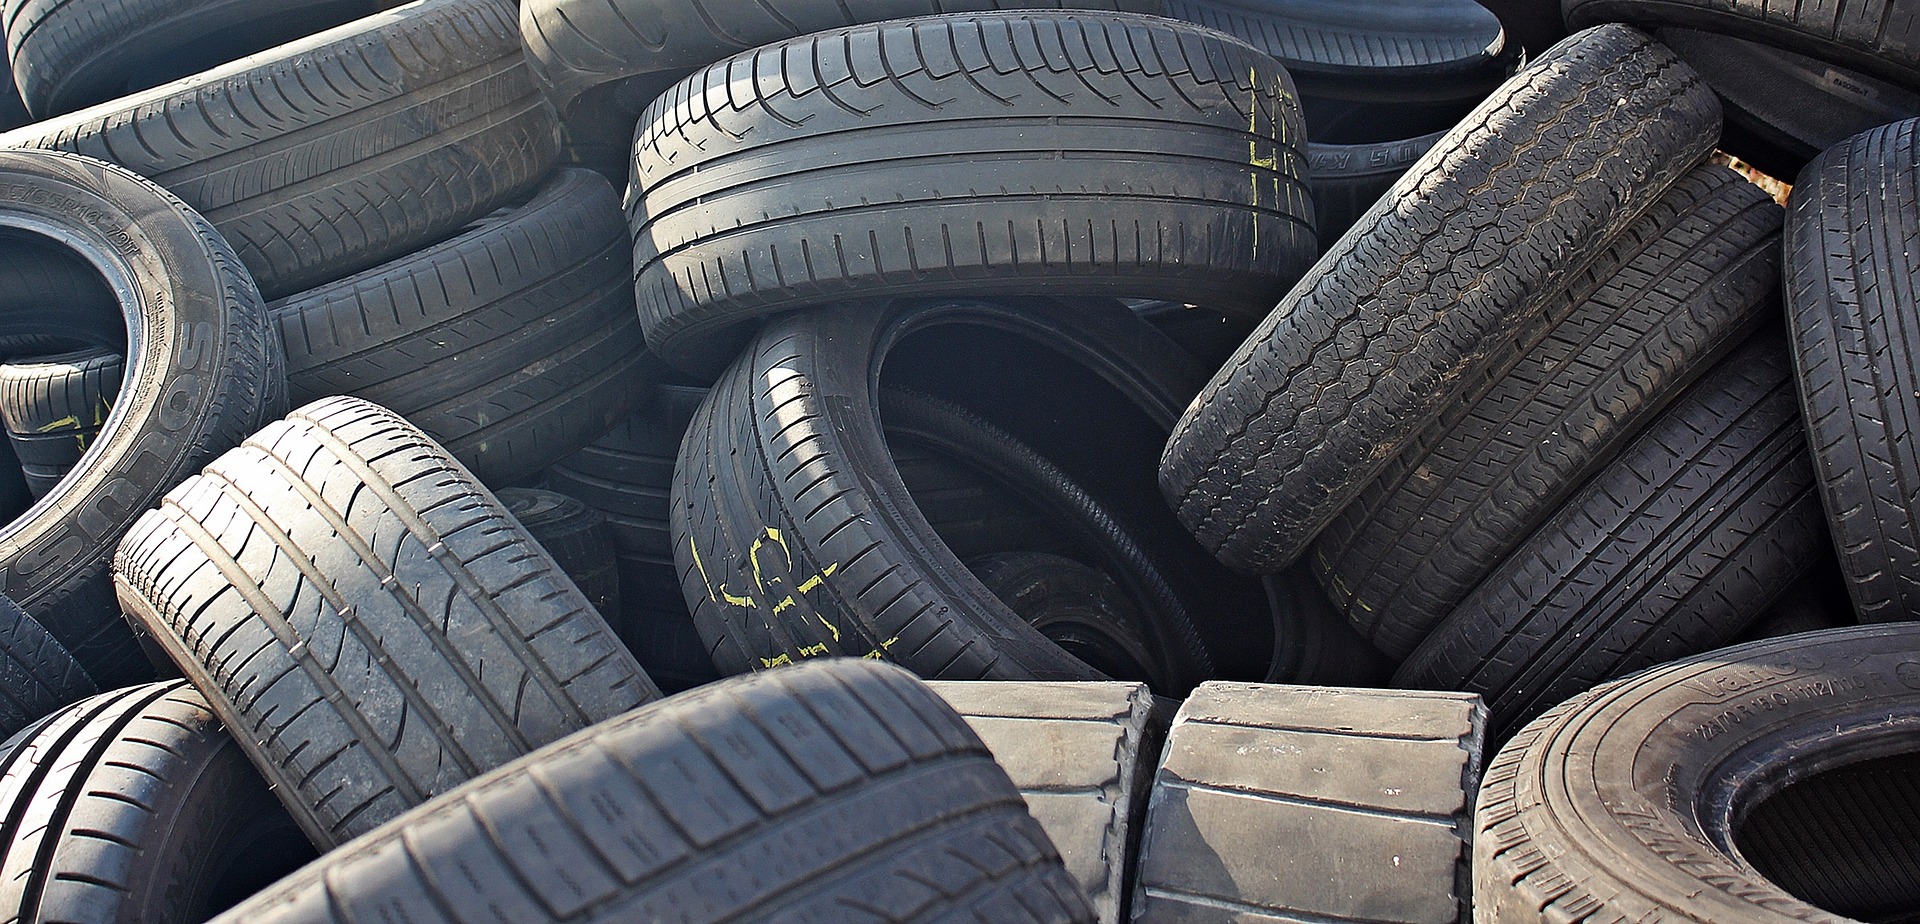 Pile of used automobile tires